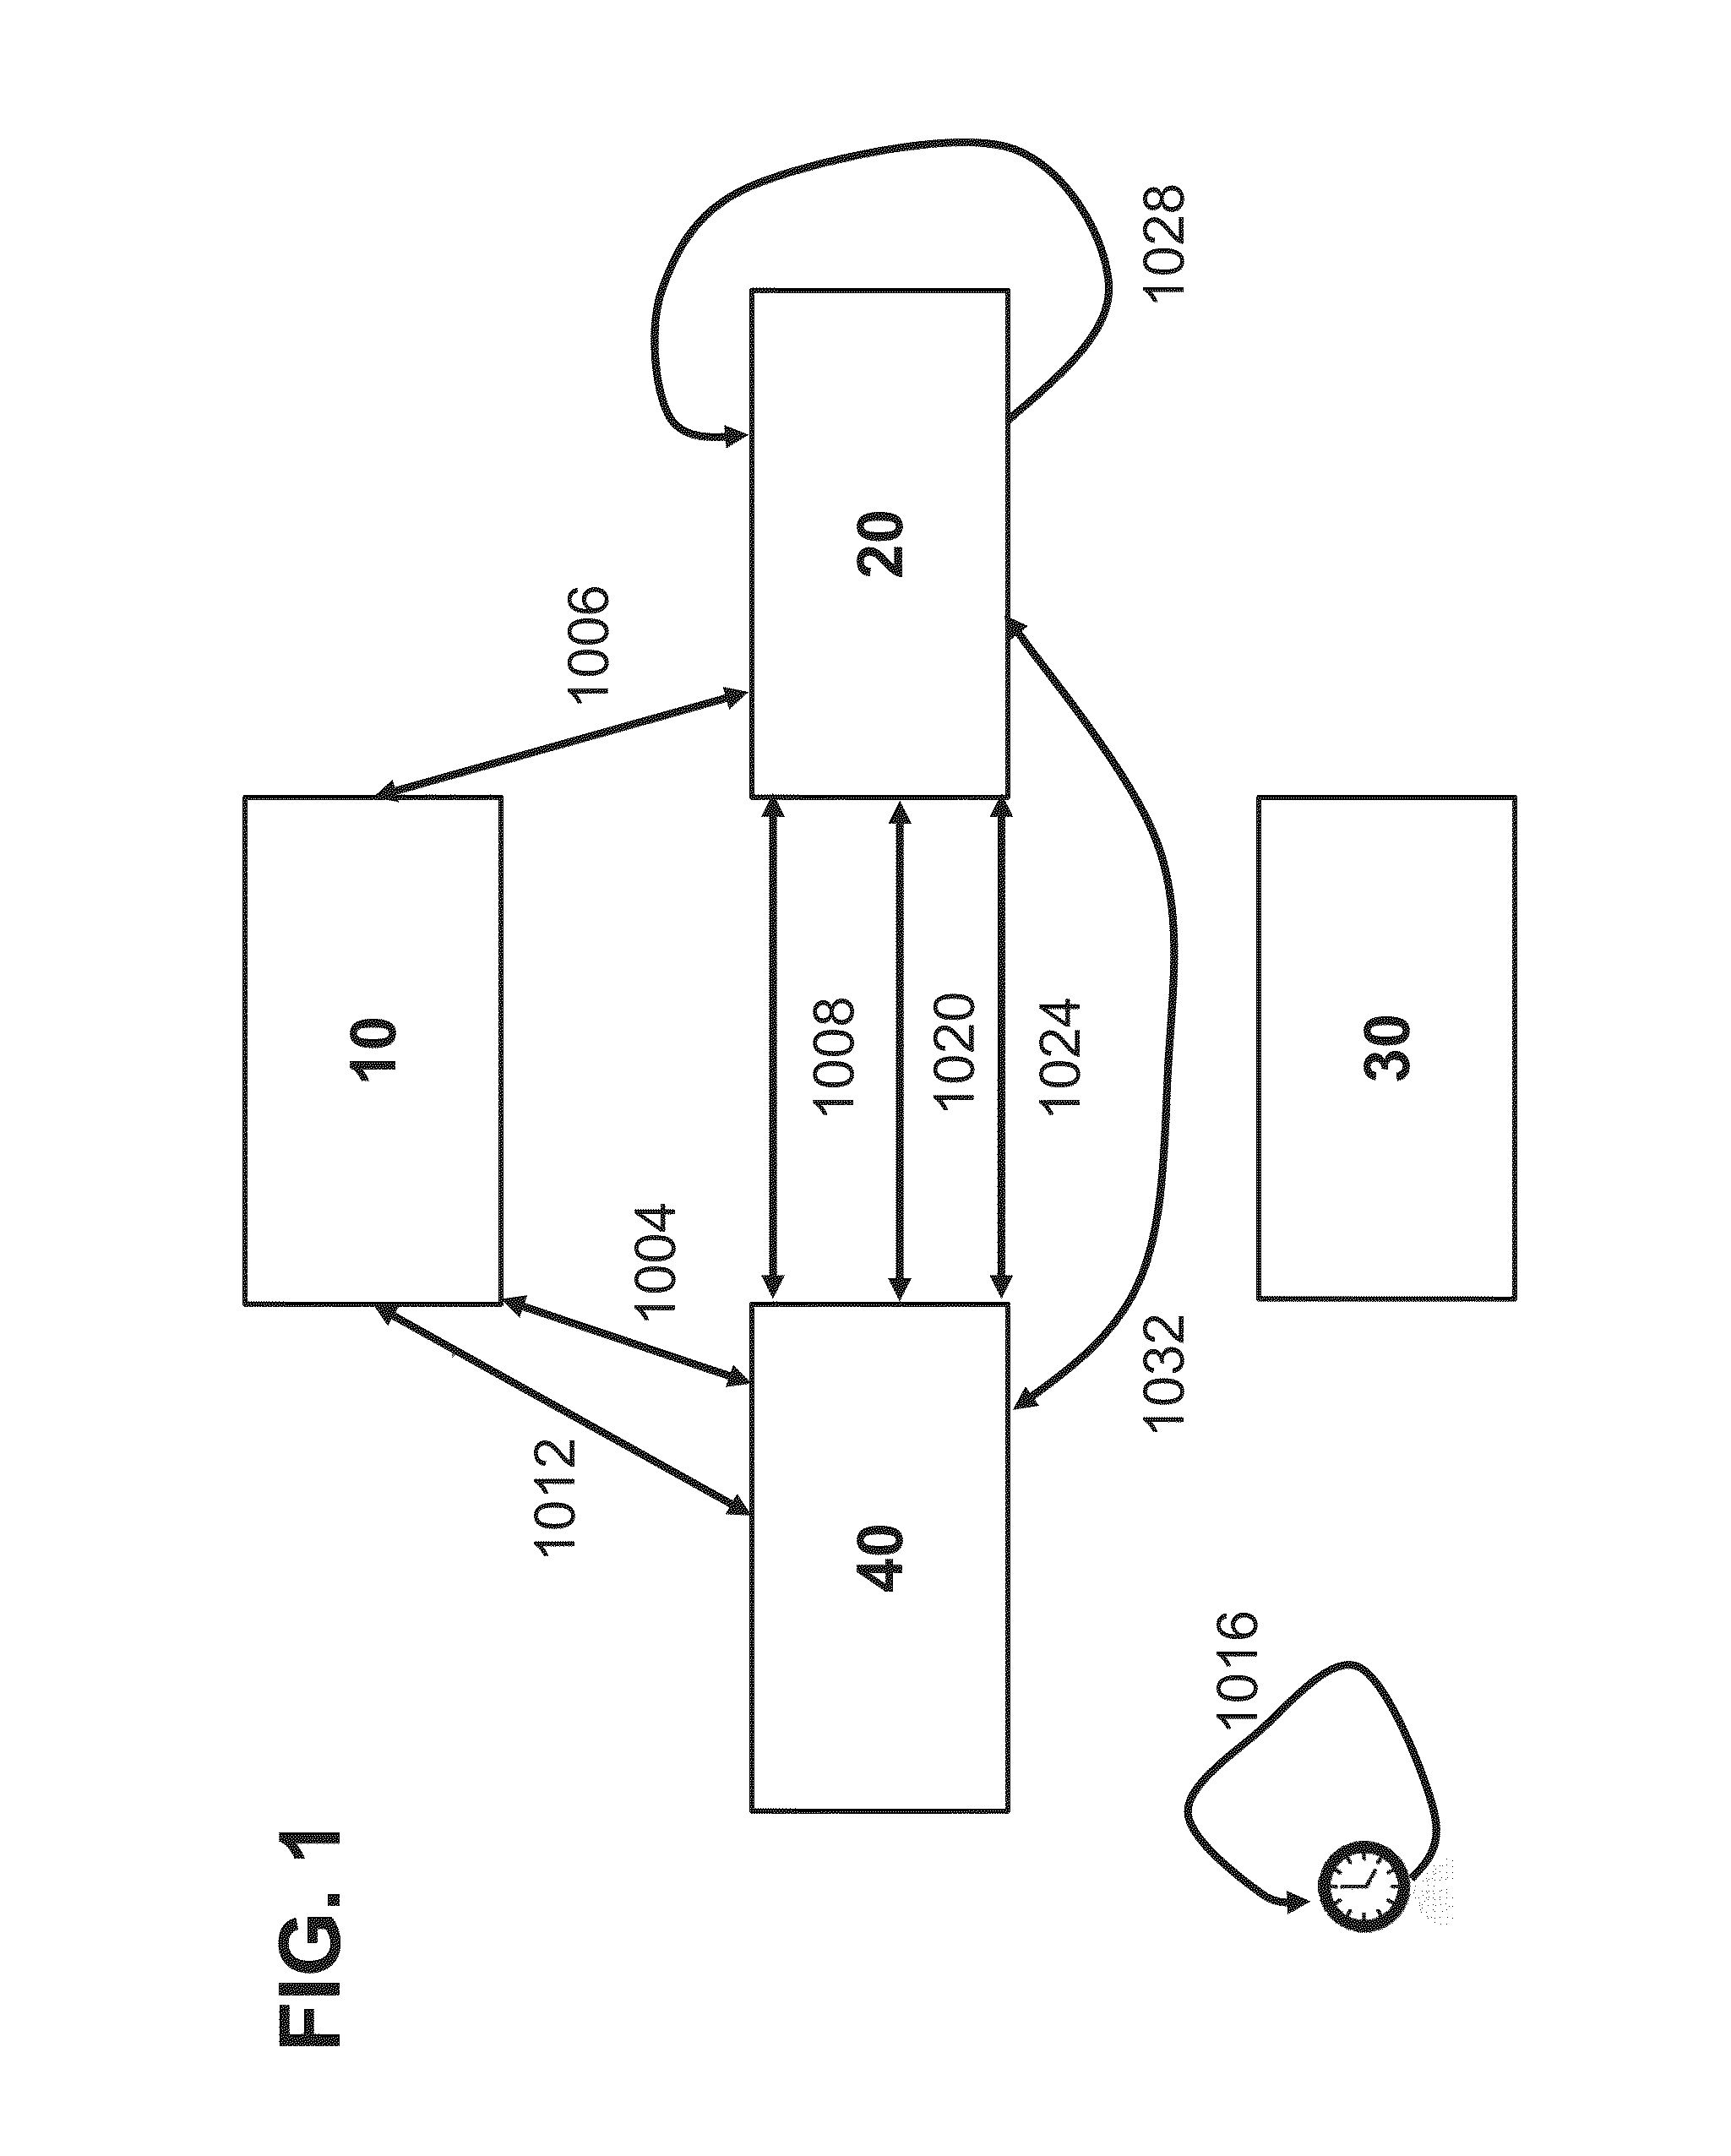 Systems and methods for authenticating benefit recipients